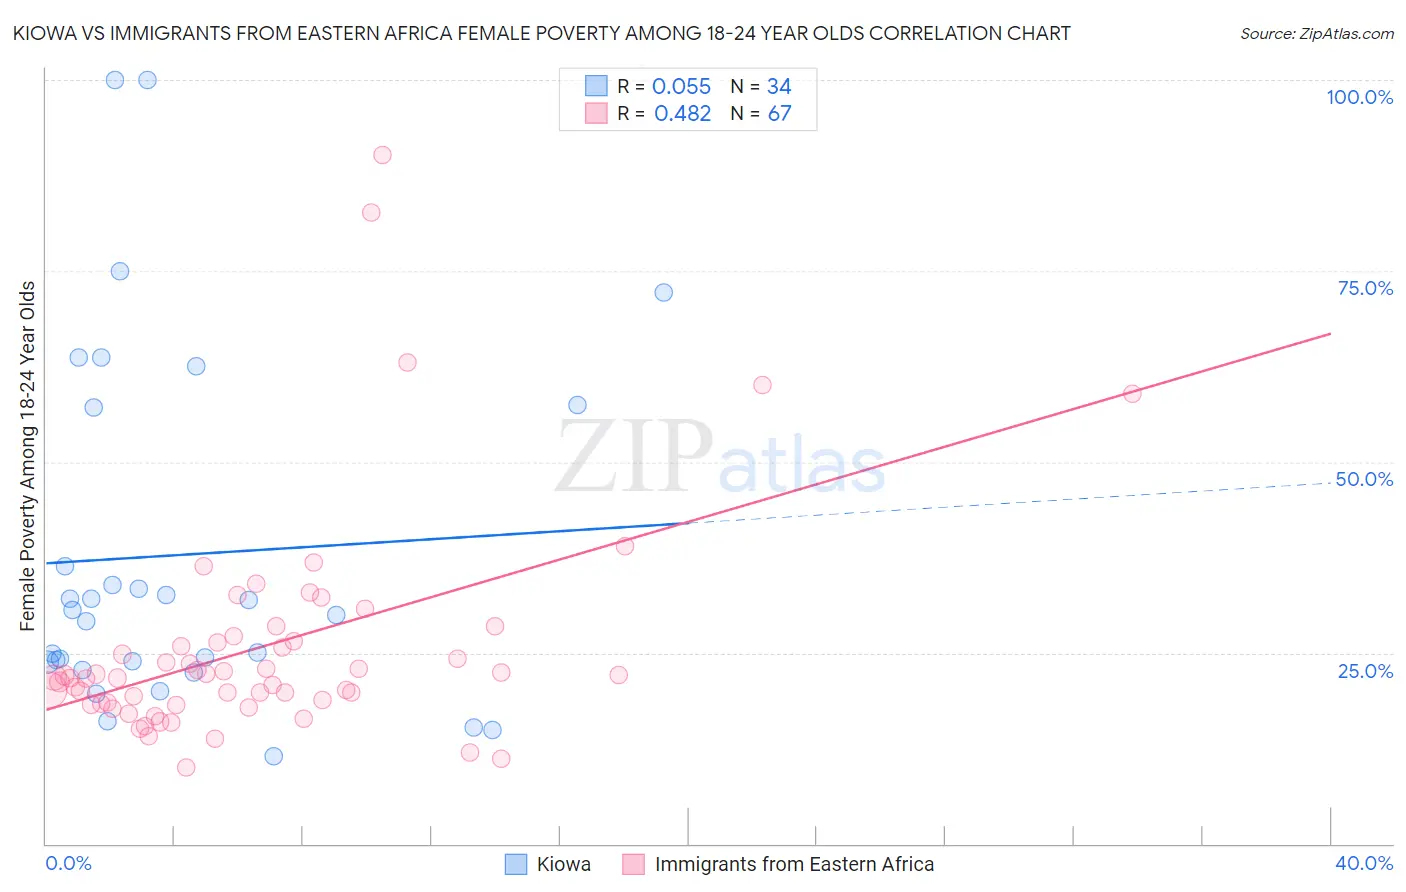 Kiowa vs Immigrants from Eastern Africa Female Poverty Among 18-24 Year Olds